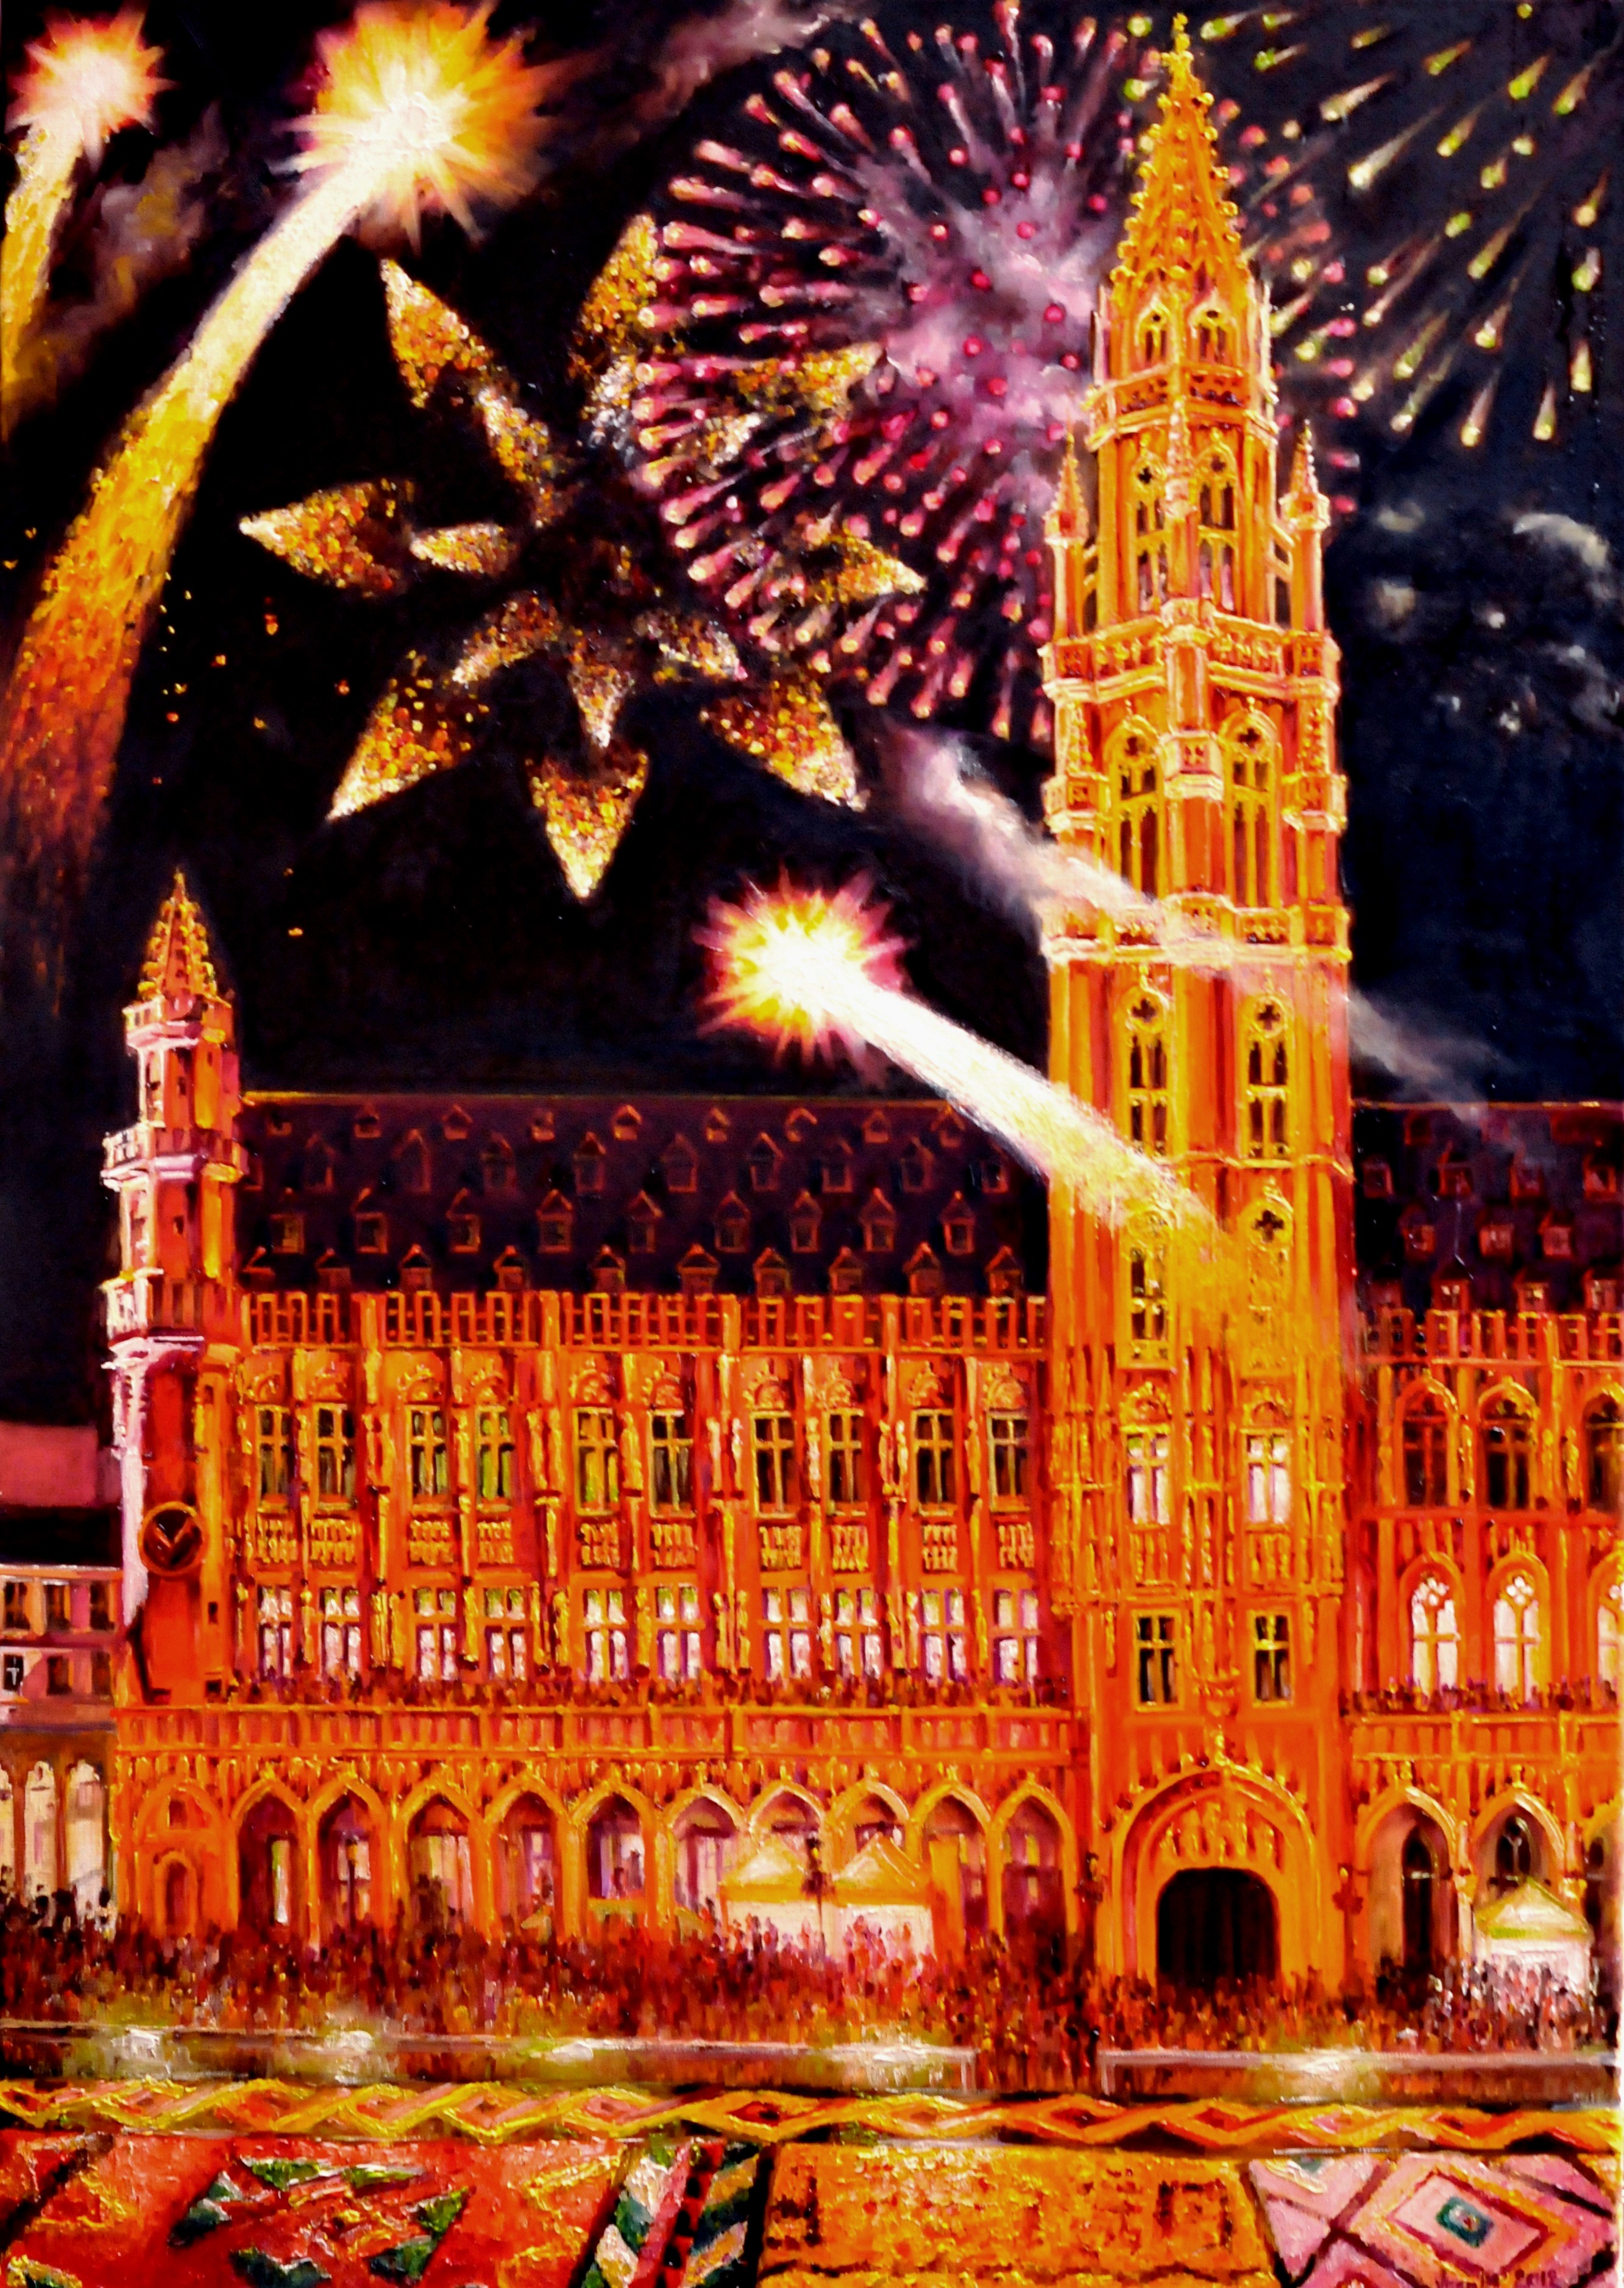 Fireworks at the Grand Place Brussels, Belgium | Oil on linen | Year: 2012 | Dimensions: 100x70cm